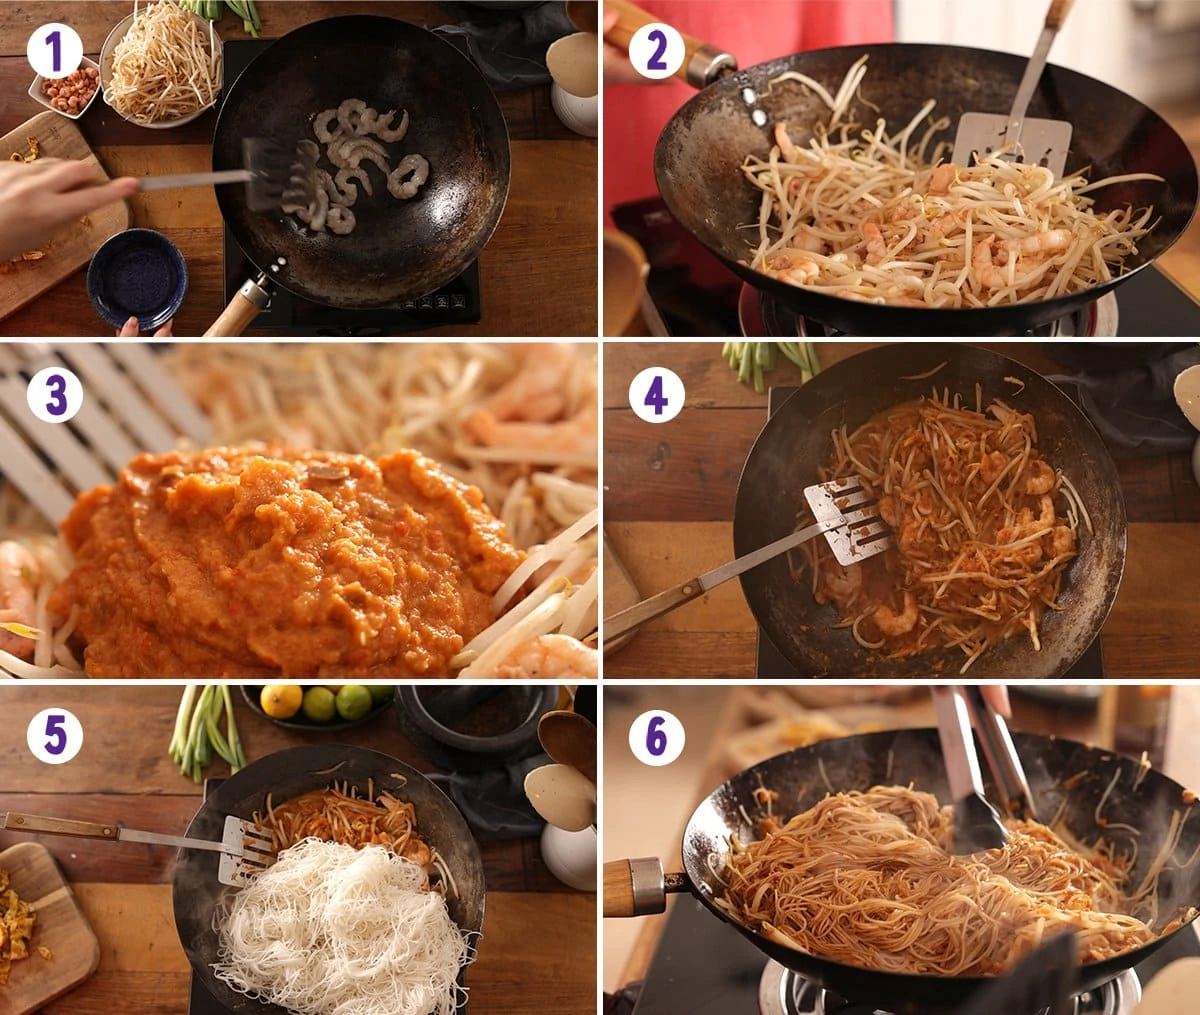 6 image collage showing the process for making Mee Siam